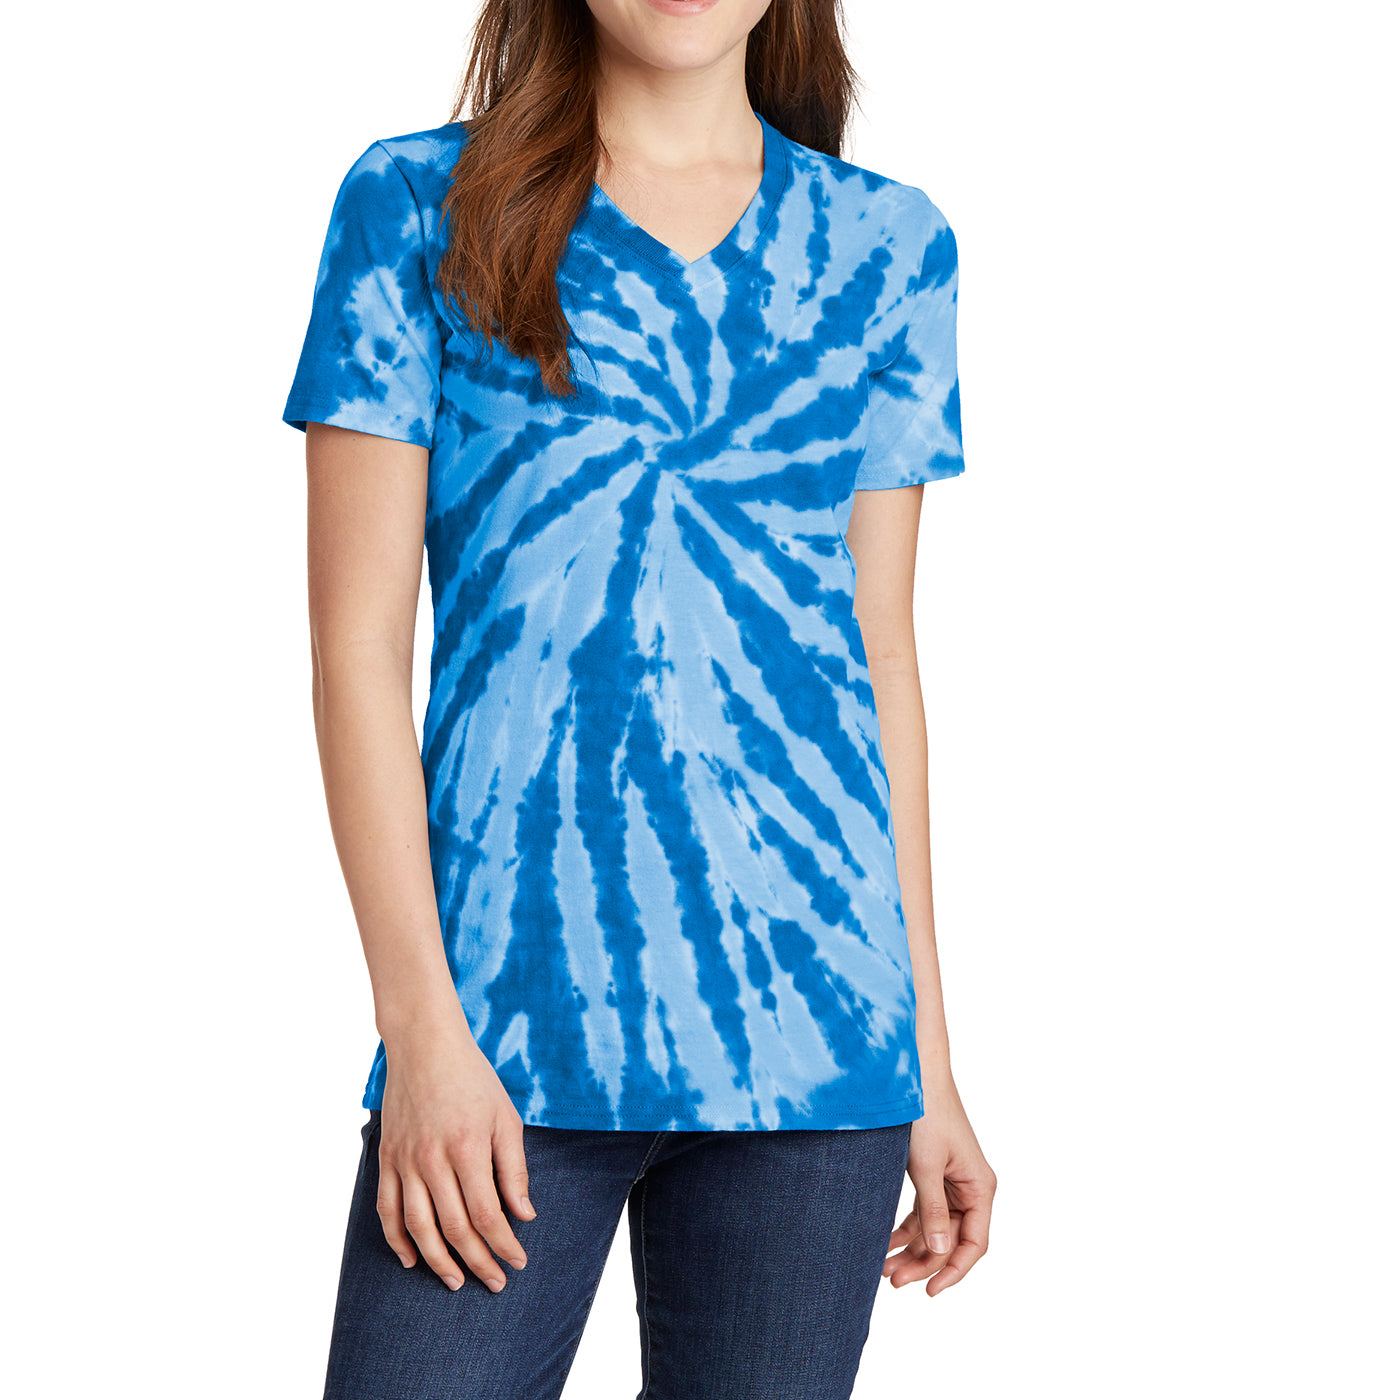 Womens Tie-Dye V-Neck Tee - Royal - Front